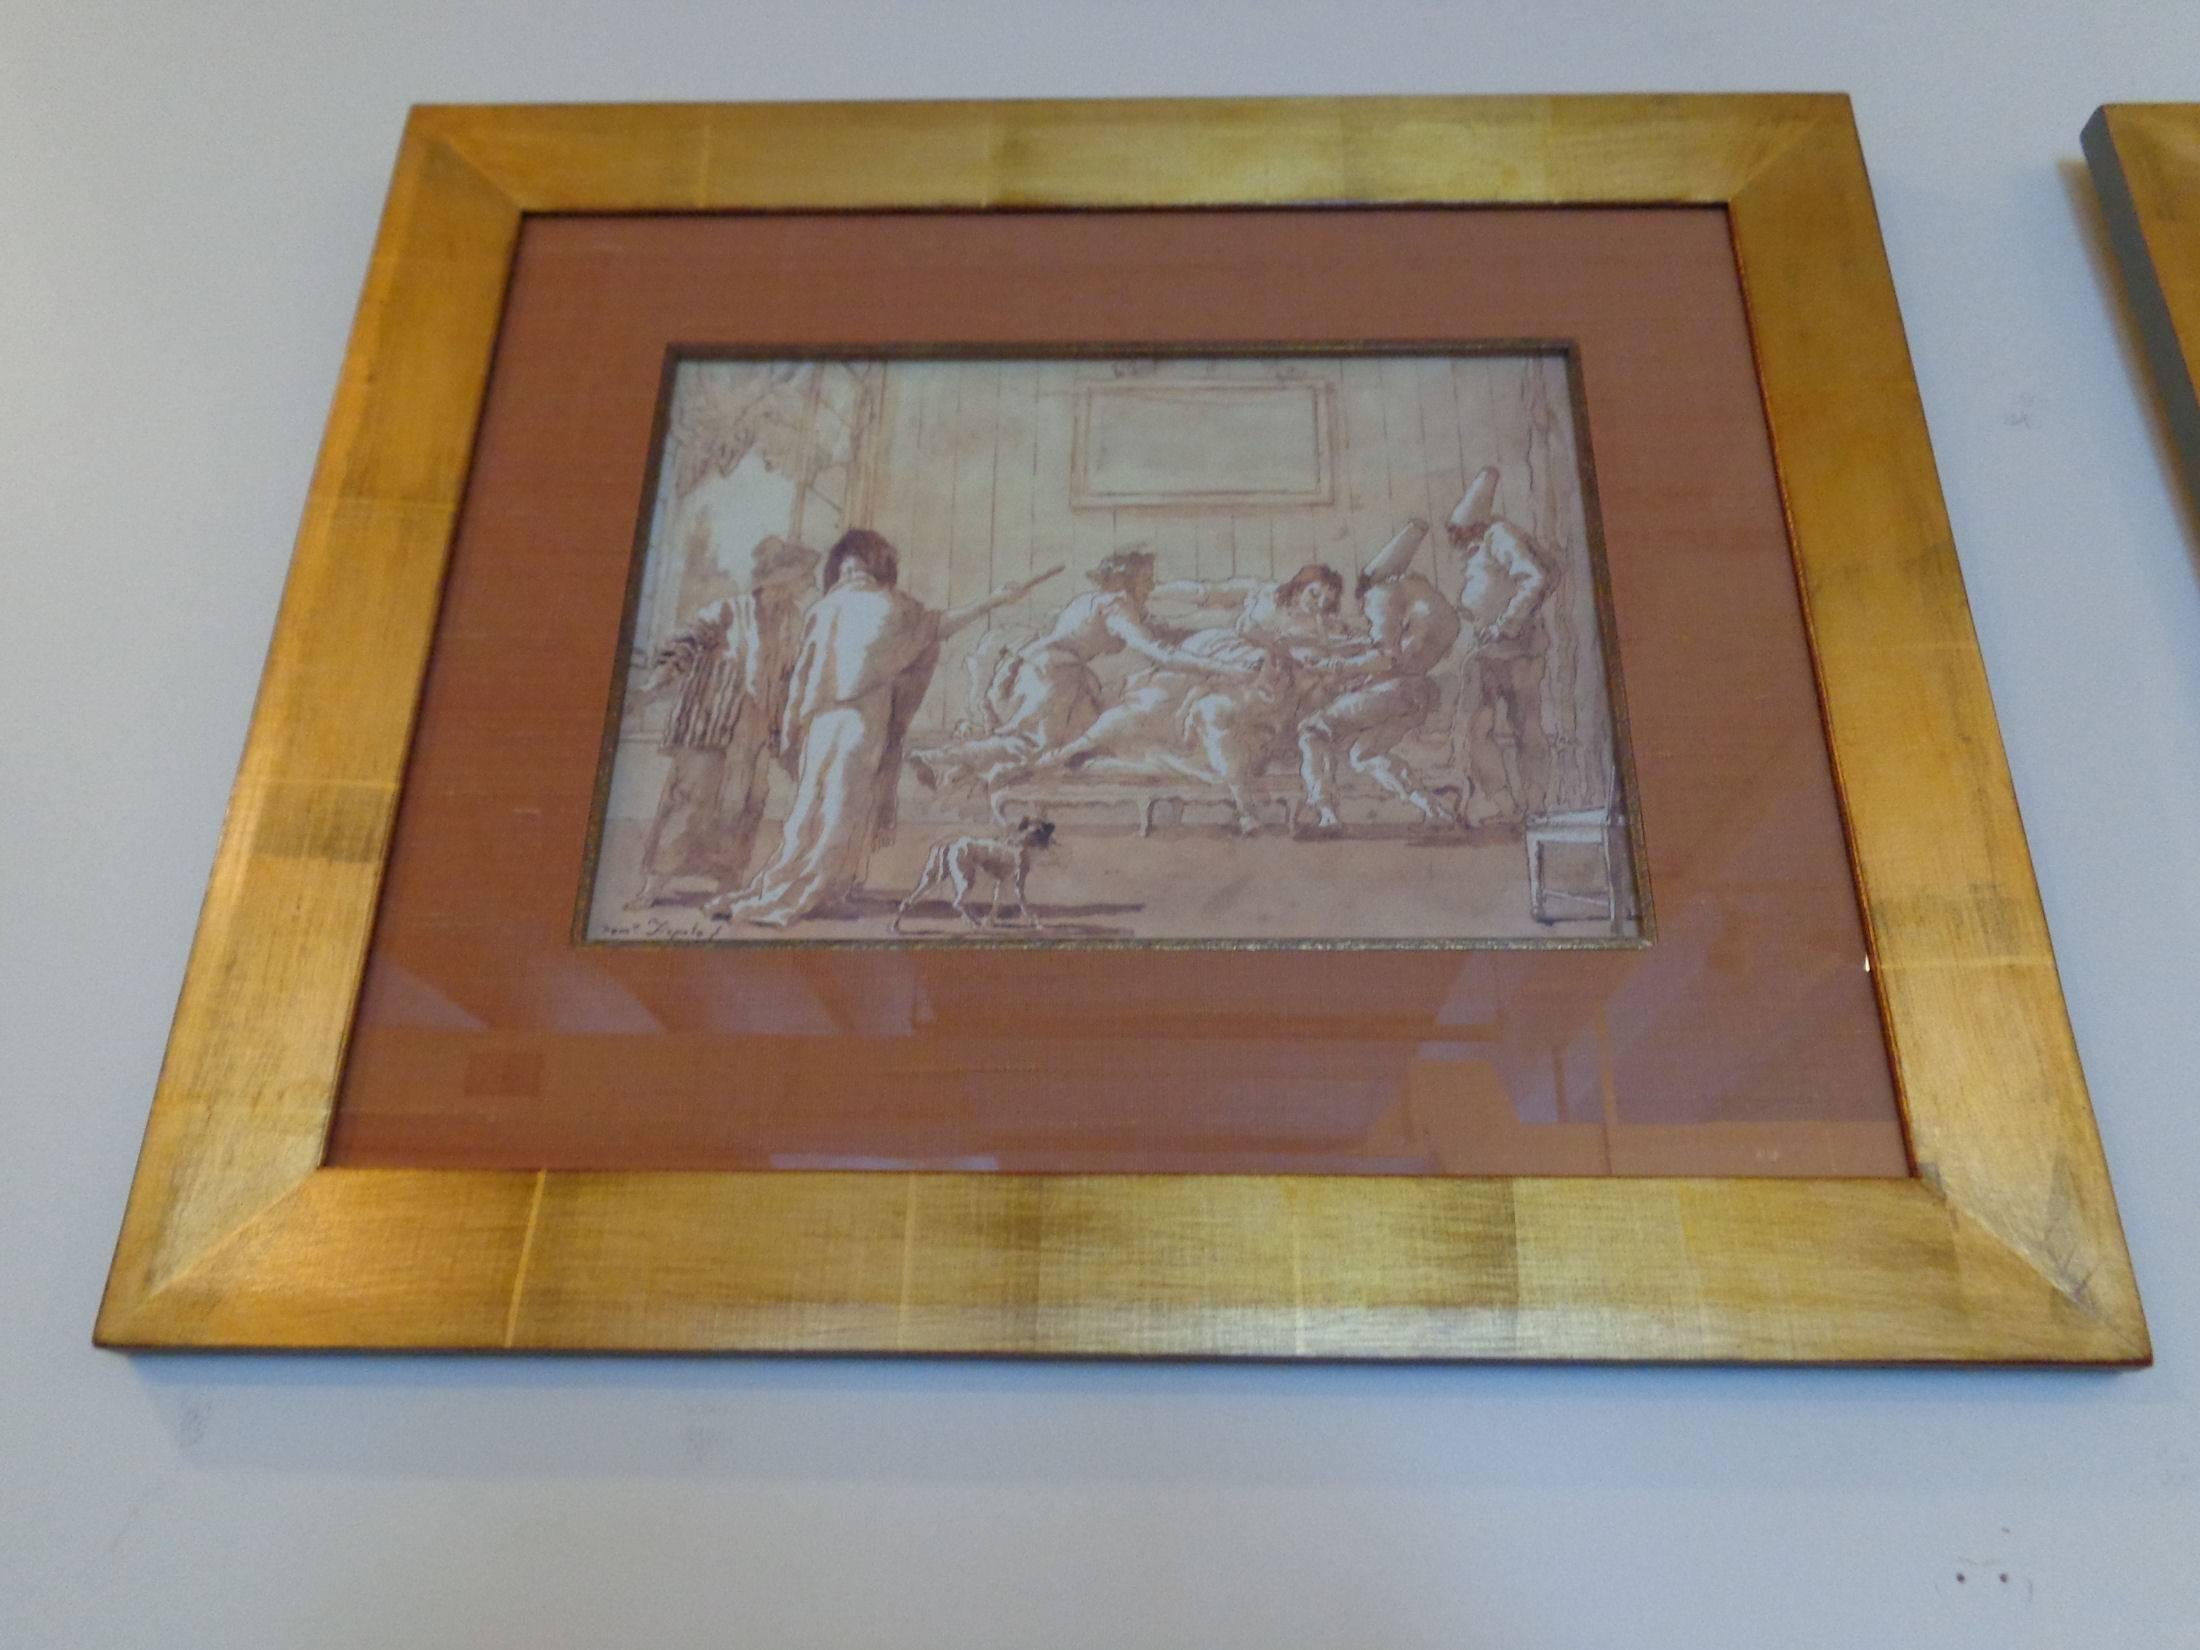 Set of six Punchinello Drawings from 1986 of the Drawings by Domenico Tiepolo.
Frames are hand gilded gold with hand wrapped silk mats and gold fillet.